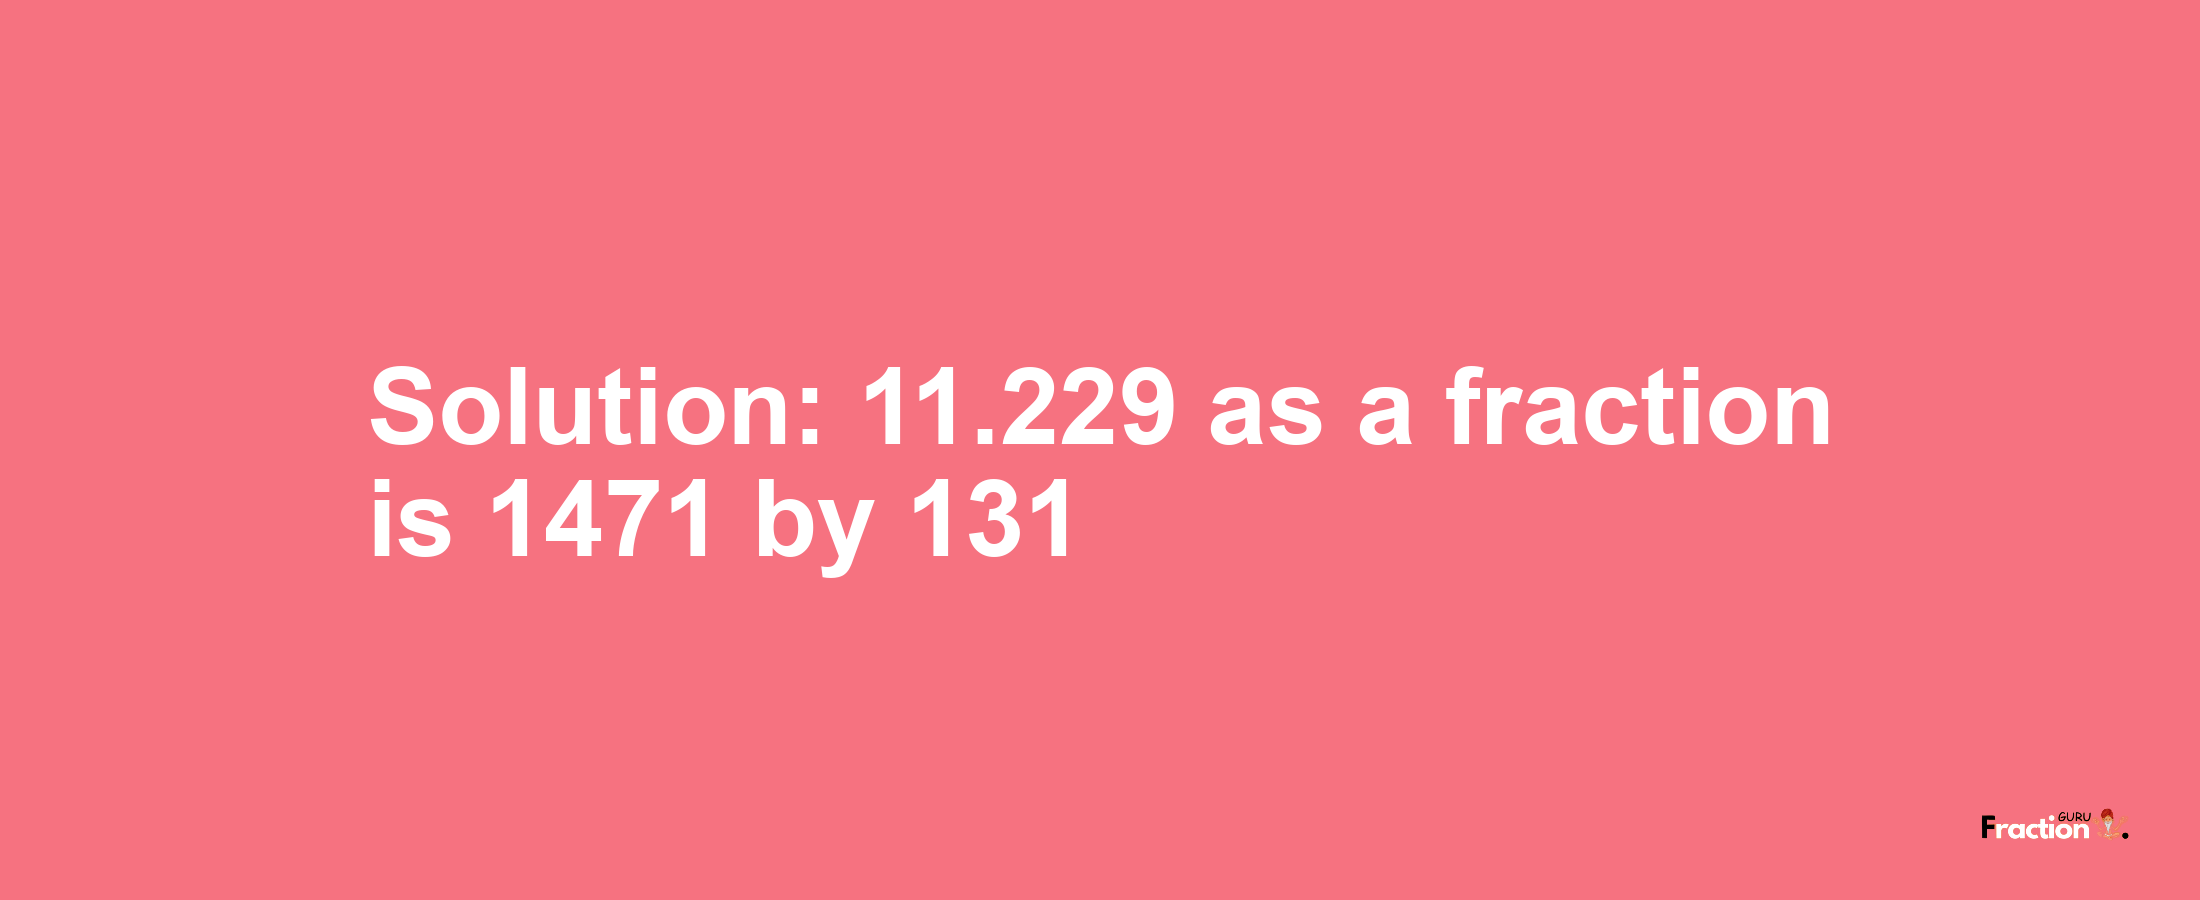 Solution:11.229 as a fraction is 1471/131